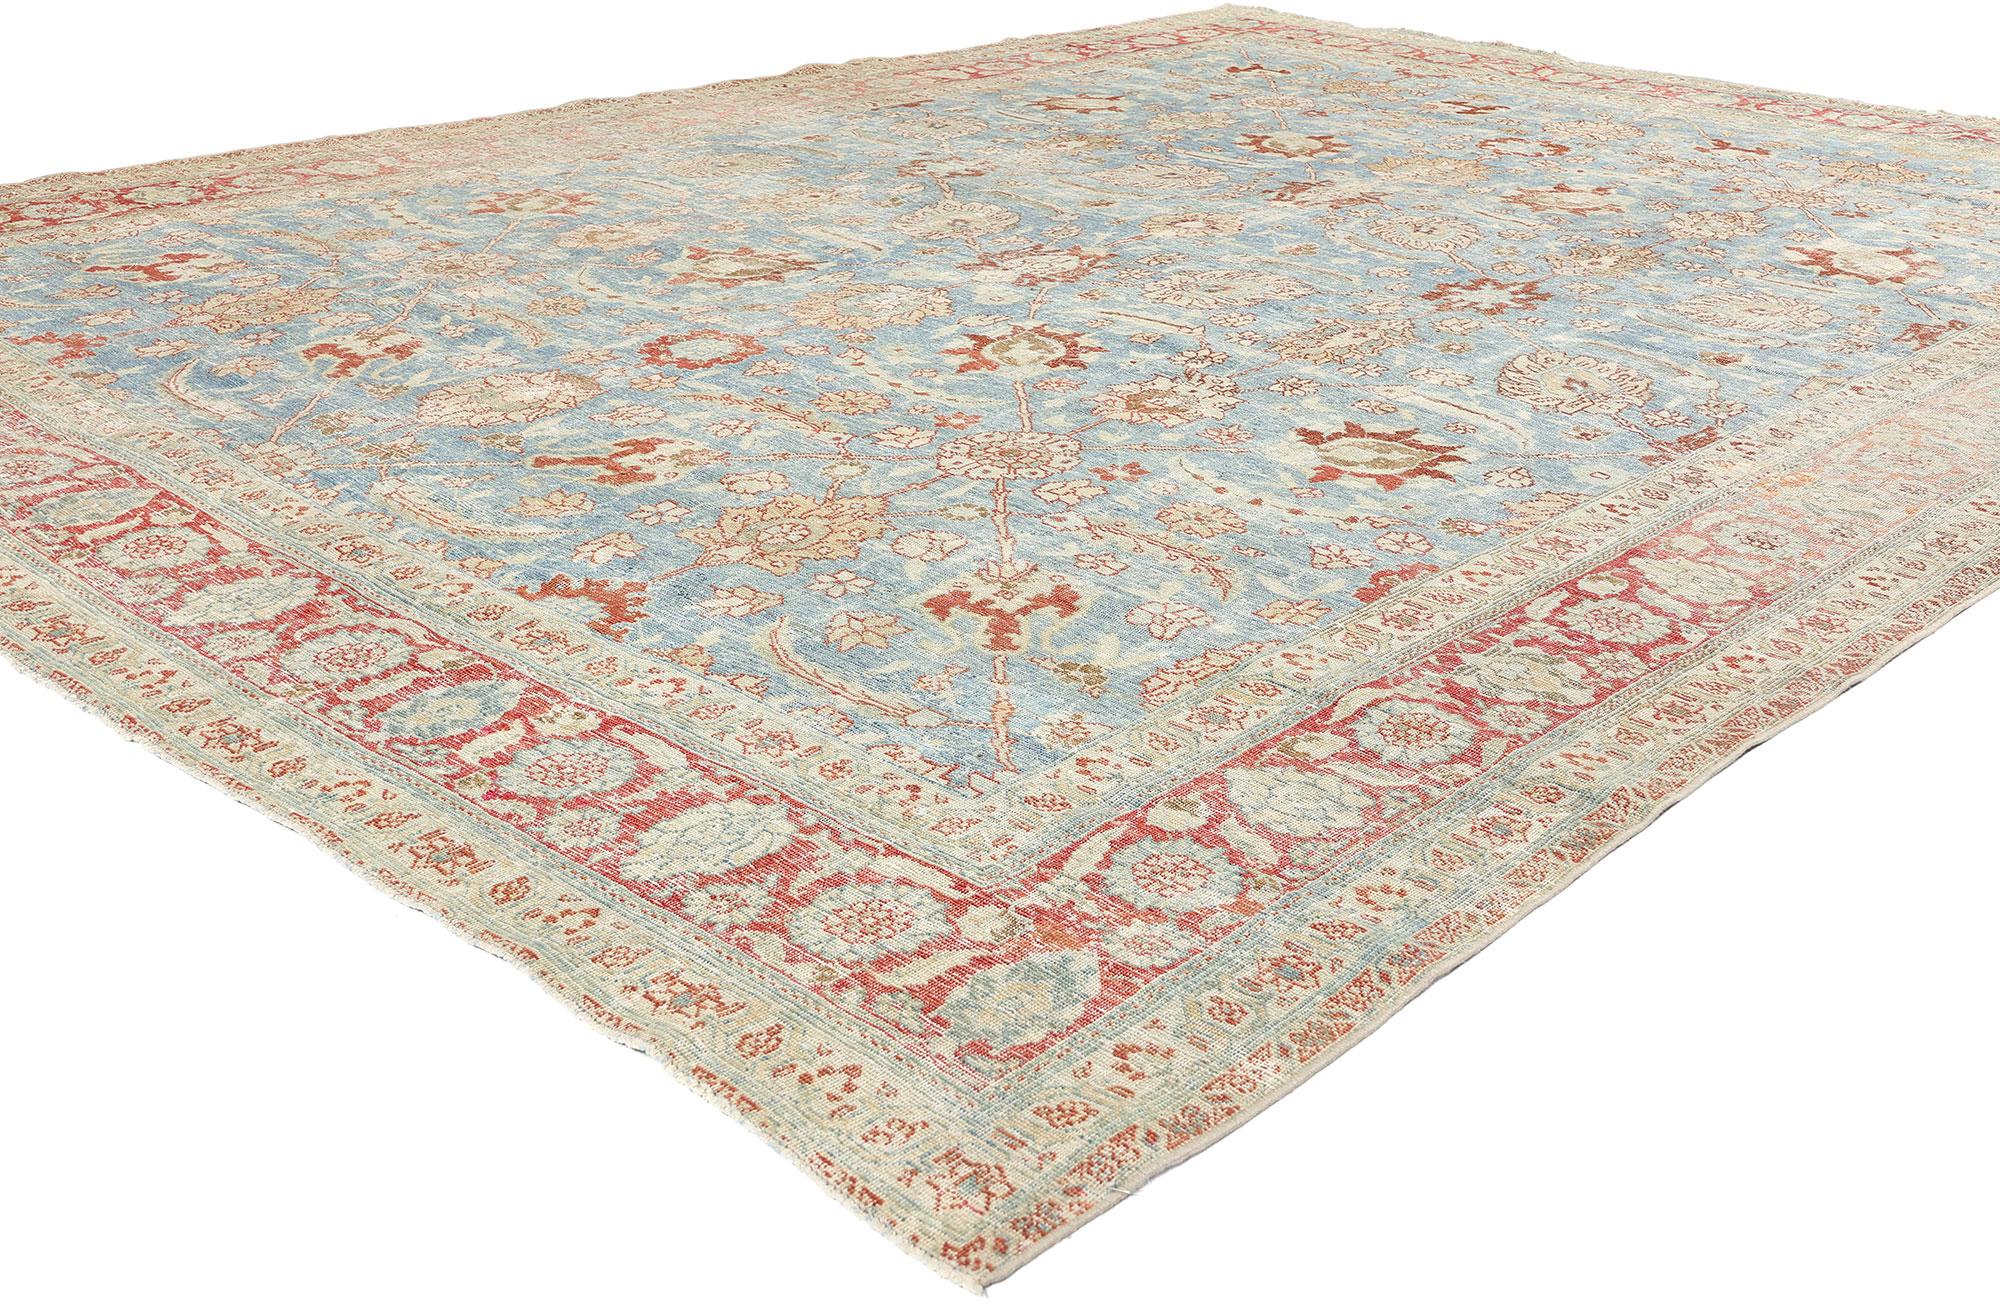 53174 Distressed Antique Persian Tabriz Rug, 08'10 x 11'09. Antique-washed distressed Persian Tabriz rugs are a type of rug that undergoes a special treatment process to give them an aged and weathered appearance, resembling antique rugs. They are